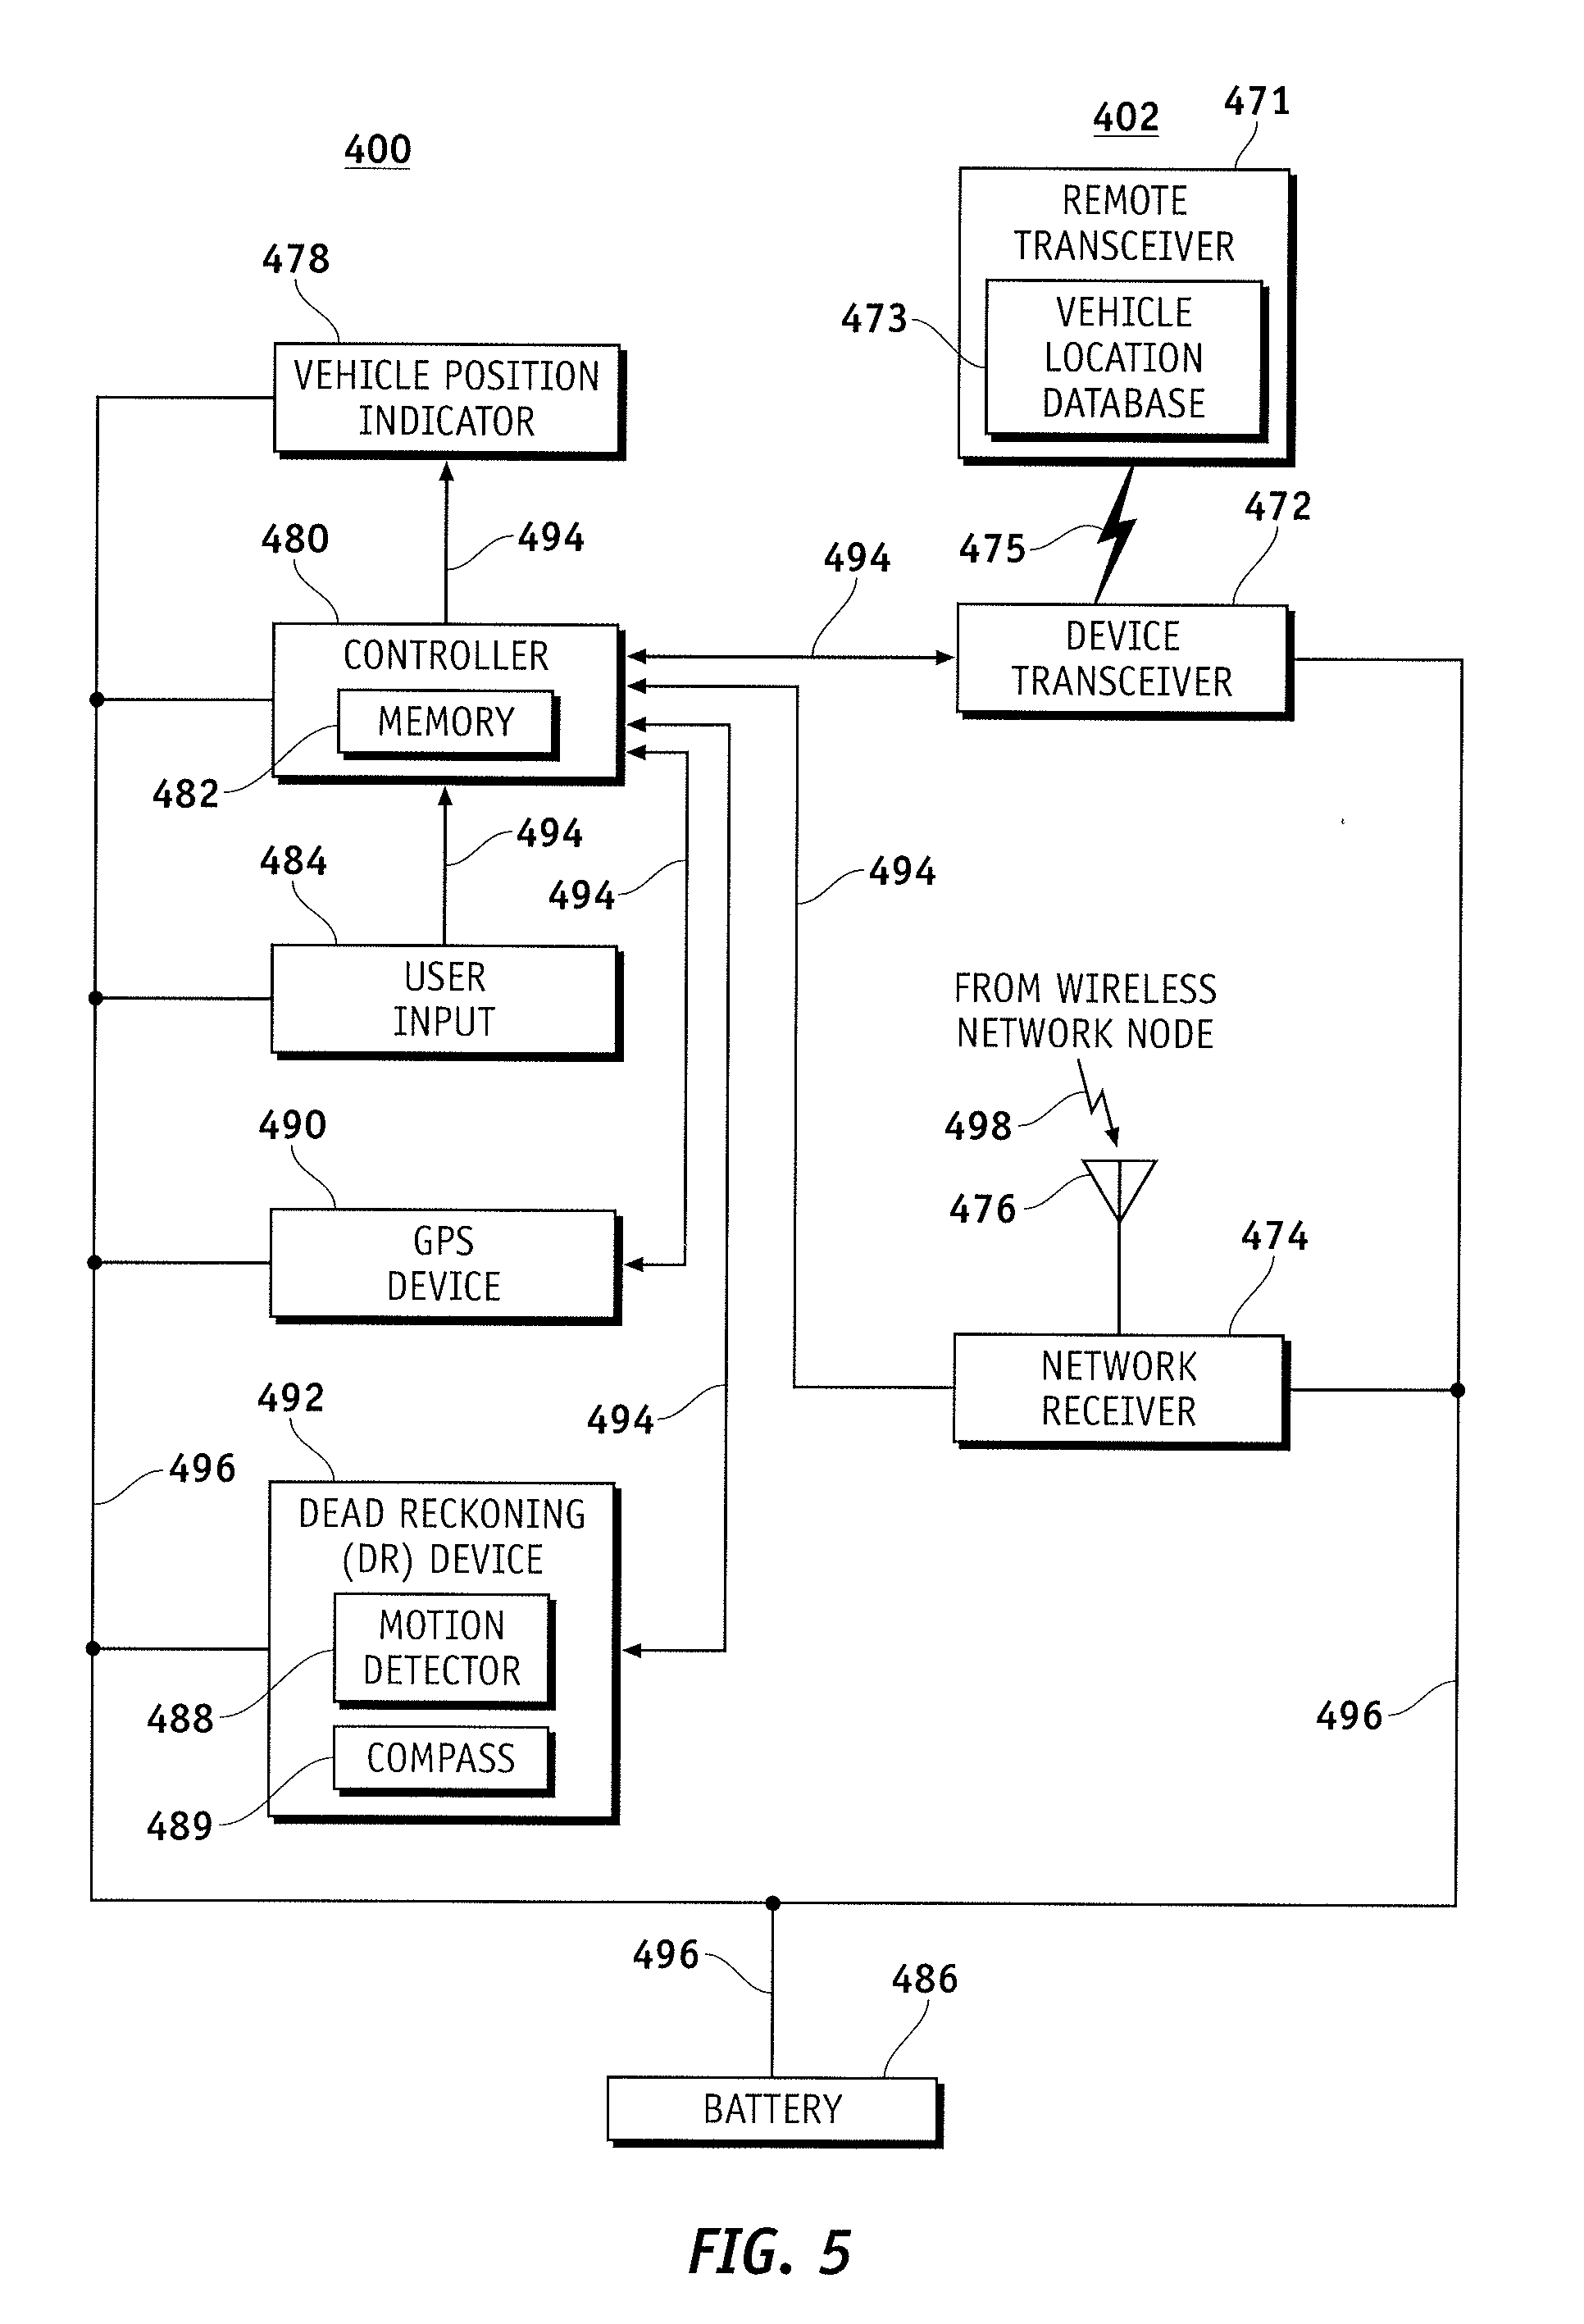 Parked Vehicle Location Information Access via a Portable Cellular Communication Device